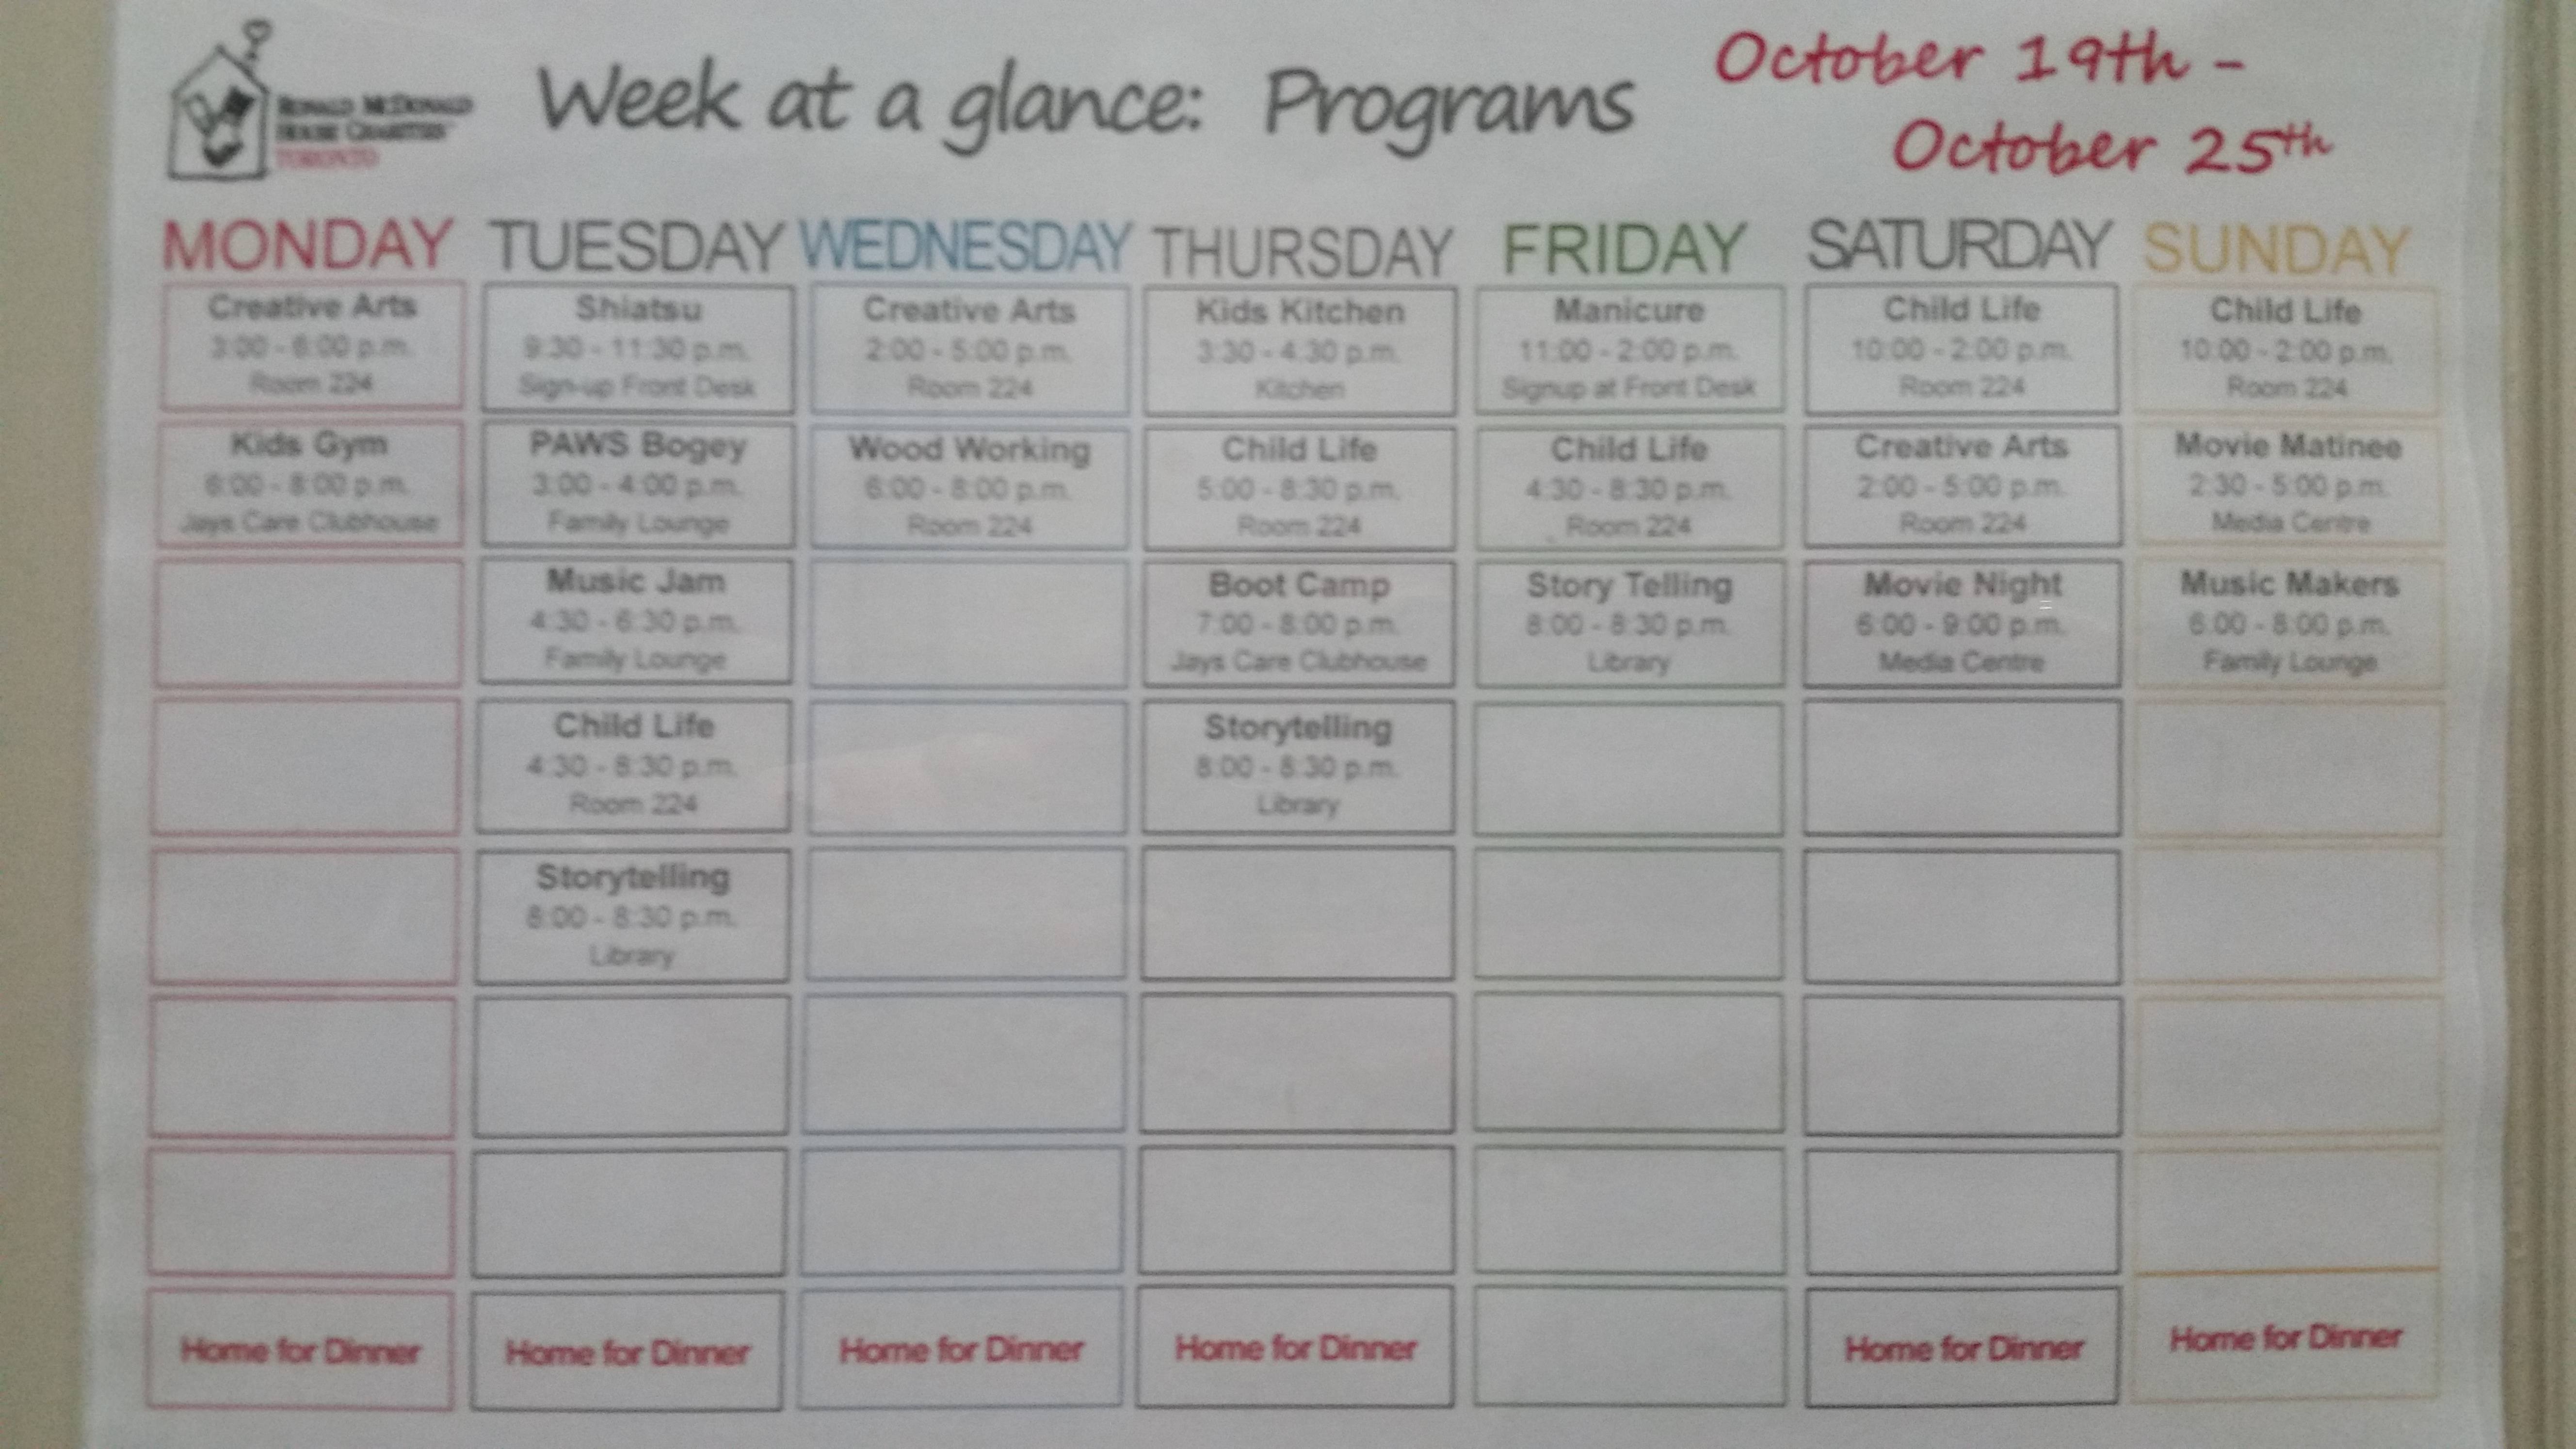 Week at a Glance from Oct 19 to 25